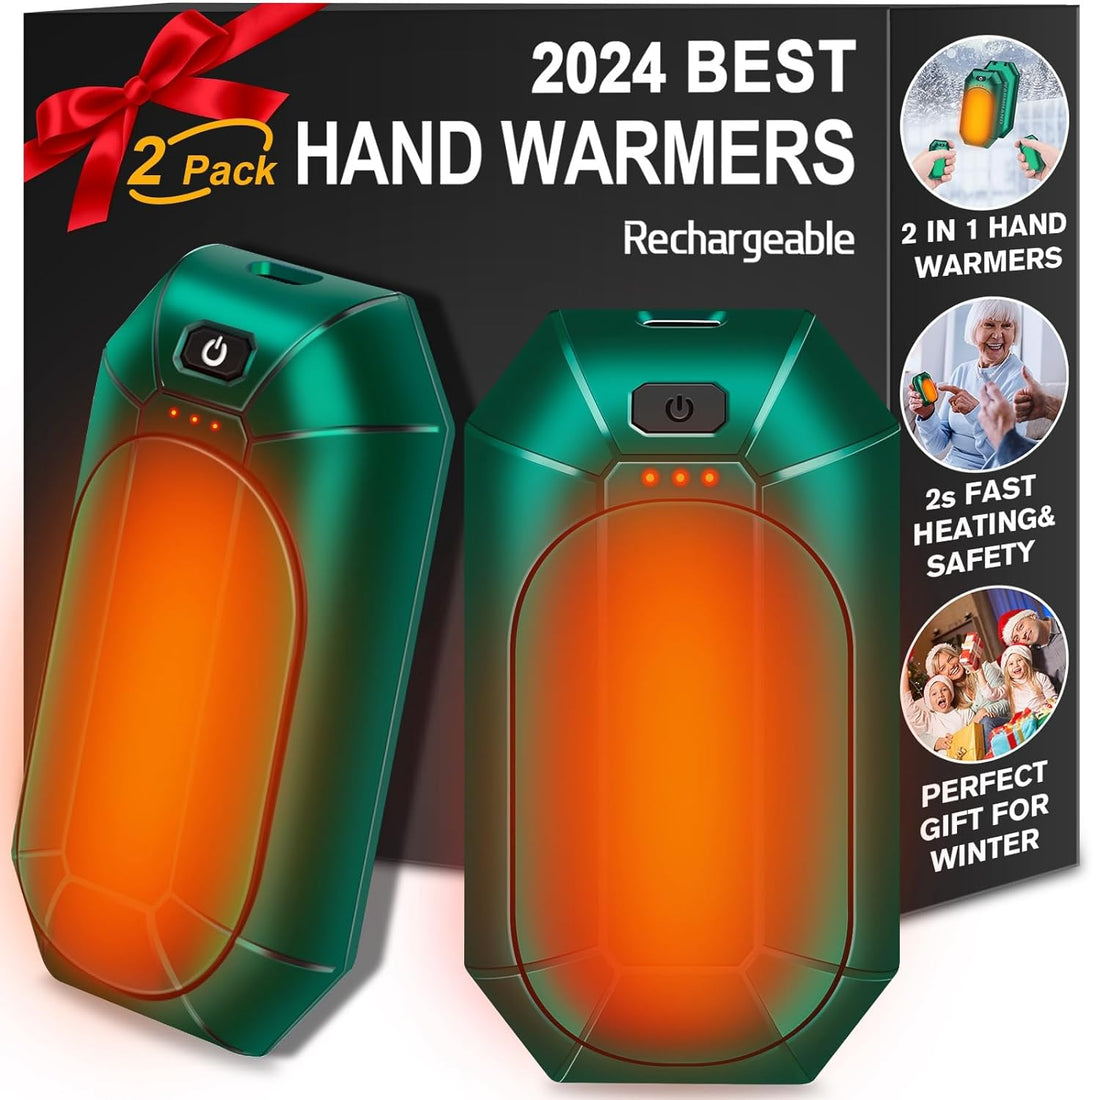 2-Pack Hand Warmers Rechargeable,Portable Electric Hand Warmers Reusable,2 in 1 Handwarmers,Outdoor/Indoor/Working/Studying/Camping/Hunting/Golf/Pain Relief/Games/Warm Gifts for Men Women Kids